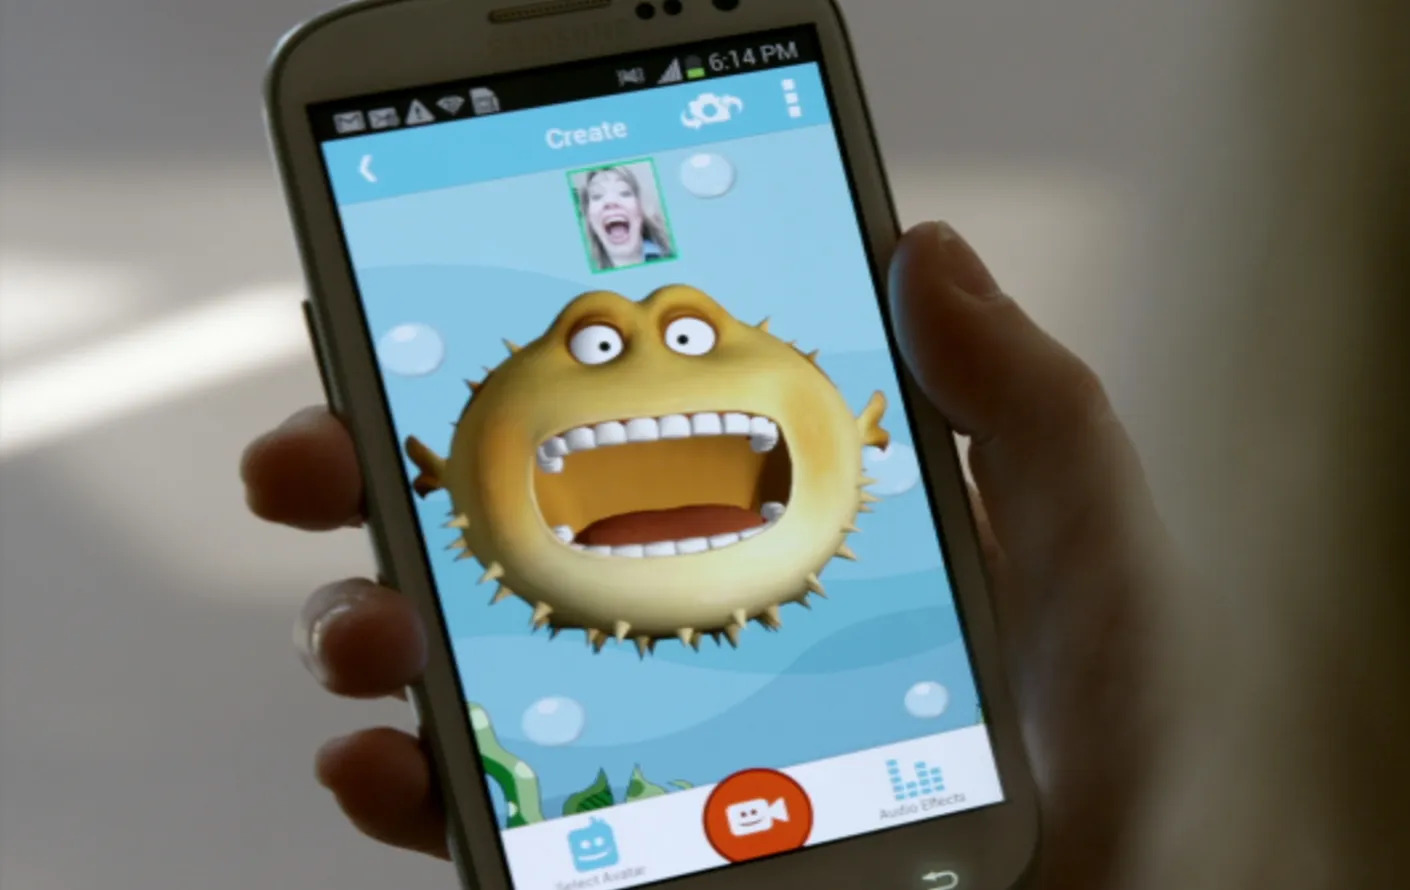 intels-pocket-avatar-lets-you-send-voice-chats-with-goofy-faces